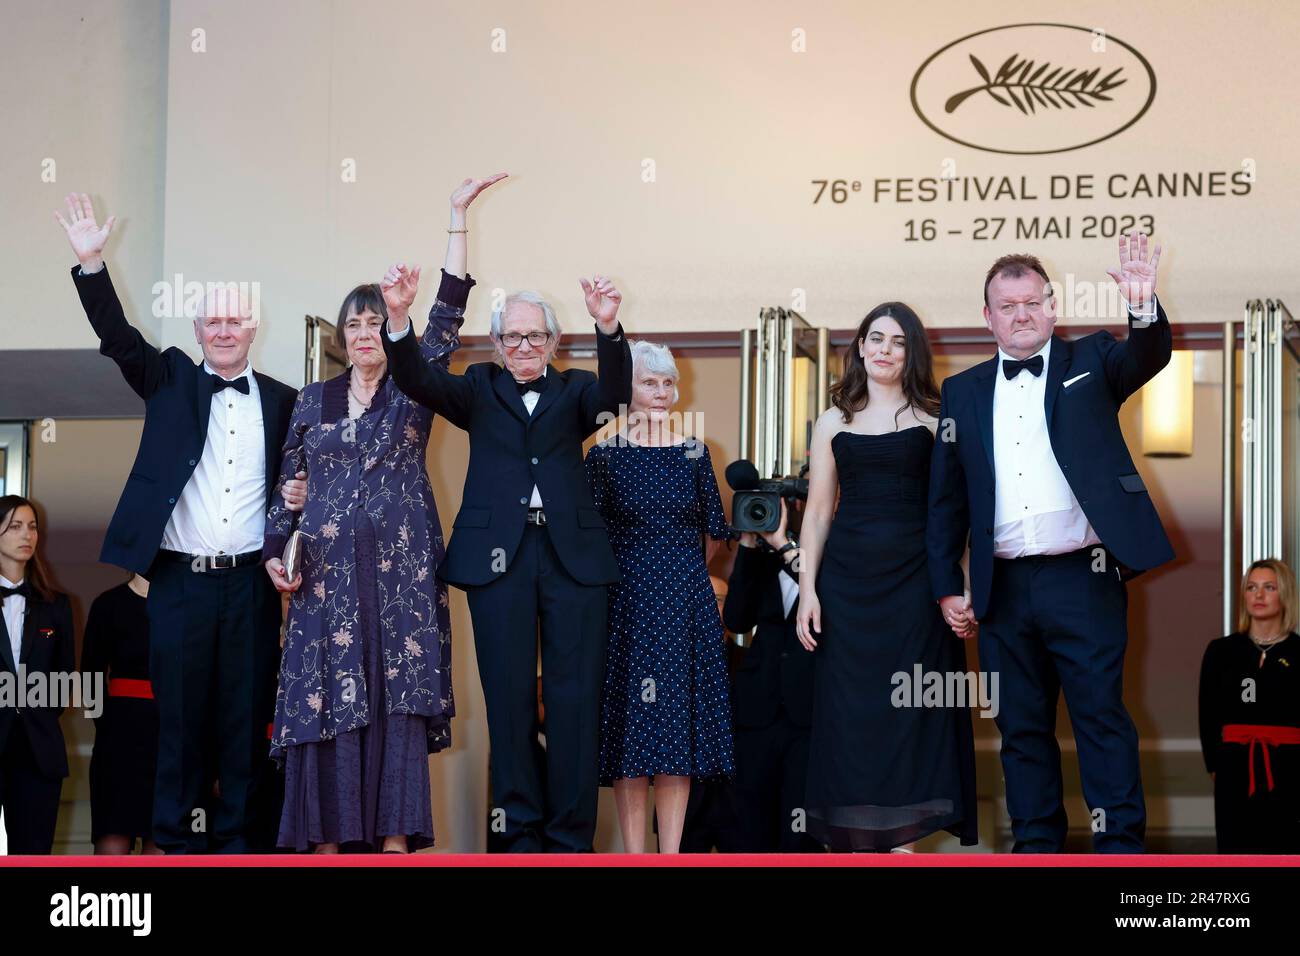 Paul Laverty, Rebecca O'Brien, Director Ken Loach, Lesley Ashton, Ebla Mari and Dave Turner attend the 'The Old Oak' premiere during the 76th Cannes Film Festival at Palais des Festivals in Cannes, France, on 26 May 2023. Credit: dpa picture alliance/Alamy Live News Stock Photo